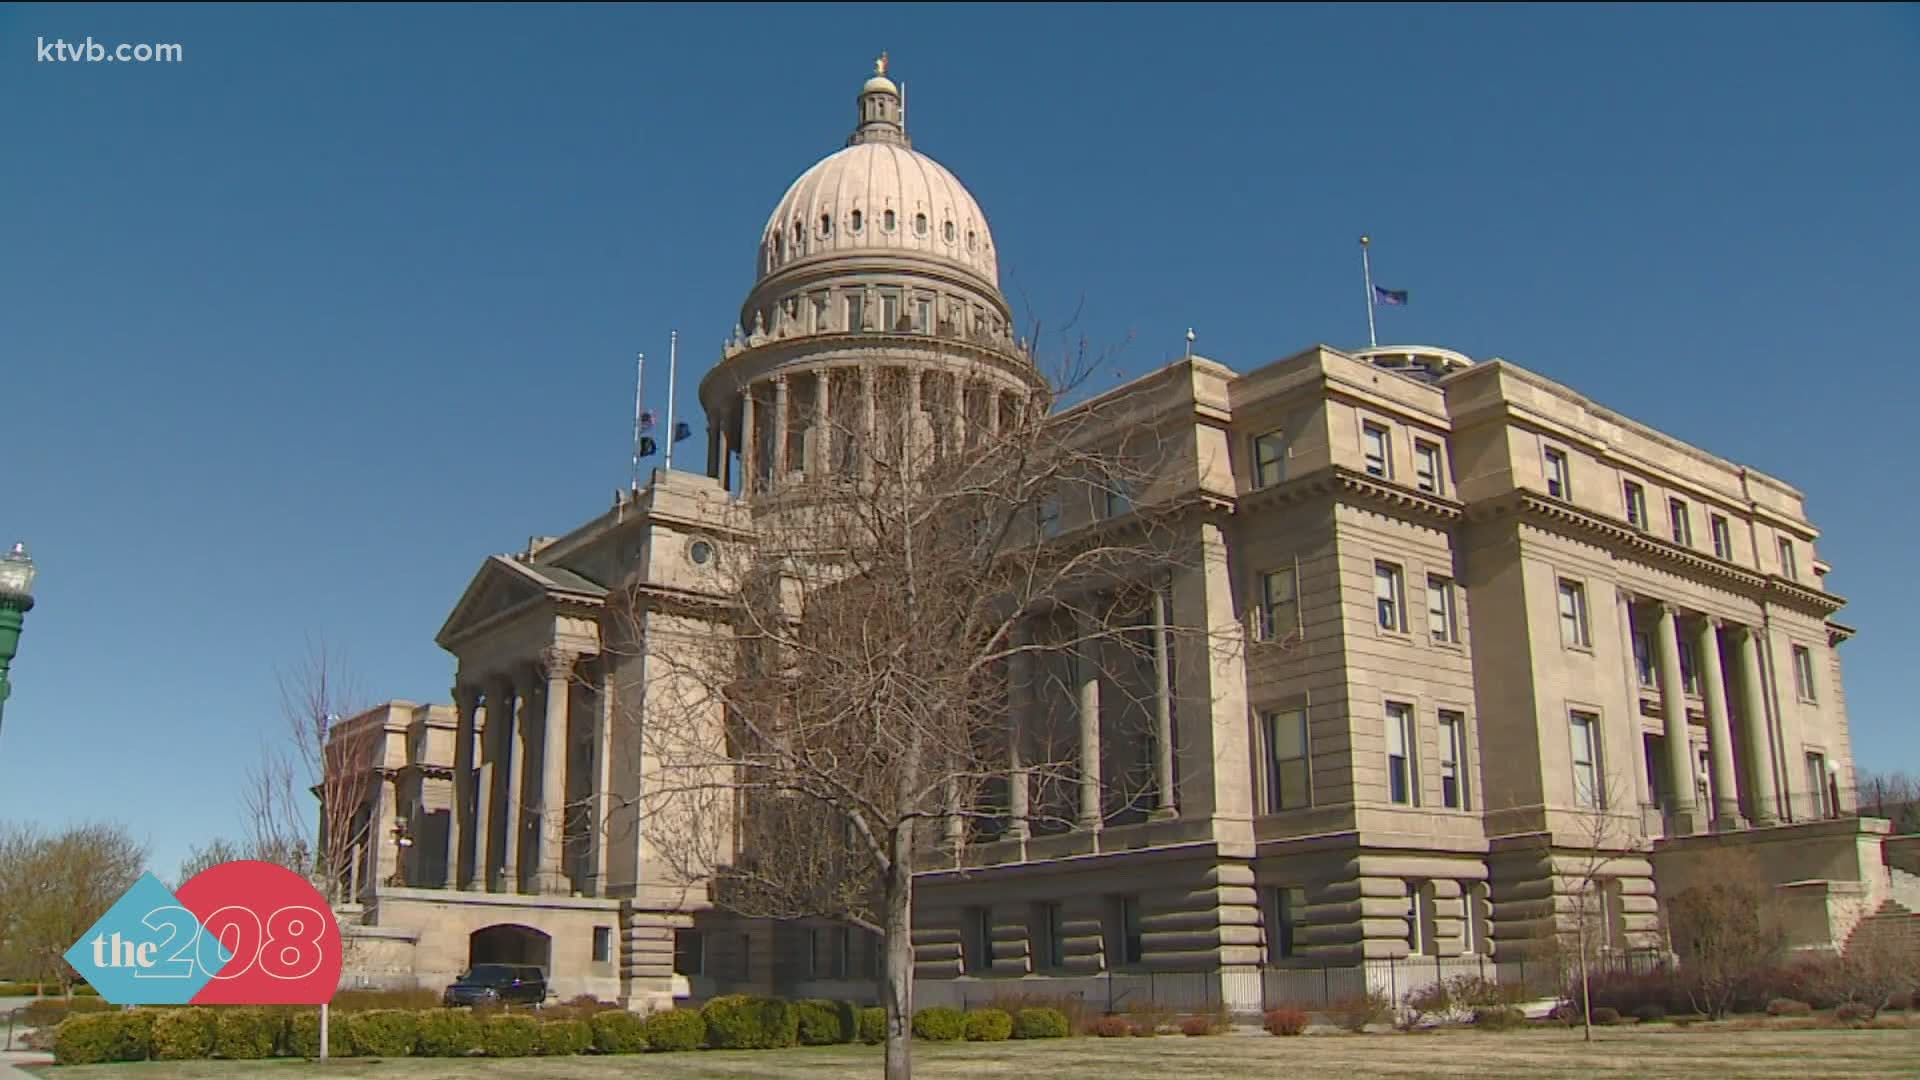 Members of the Idaho State Board of Education are reacting to claims being made by Republican lawmakers.